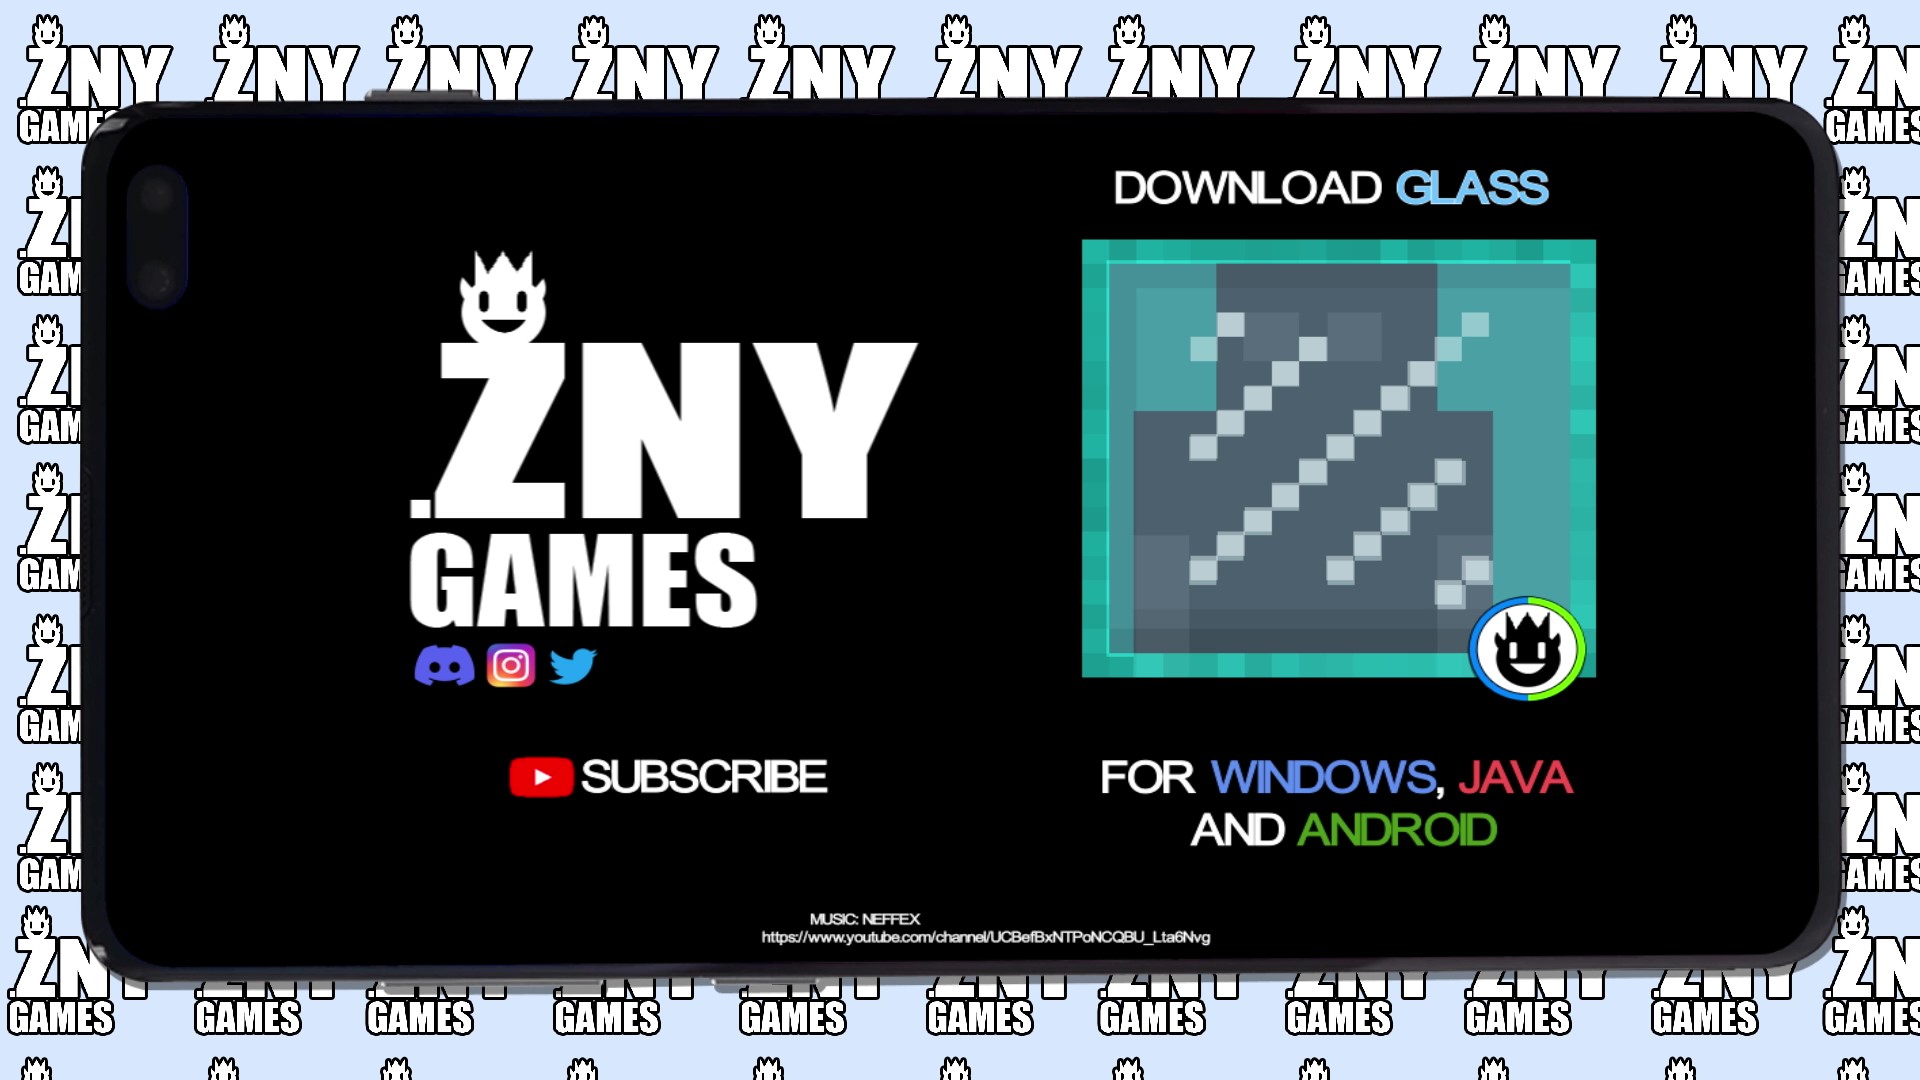 znygames themed gui texturepack glass pocket edition - download